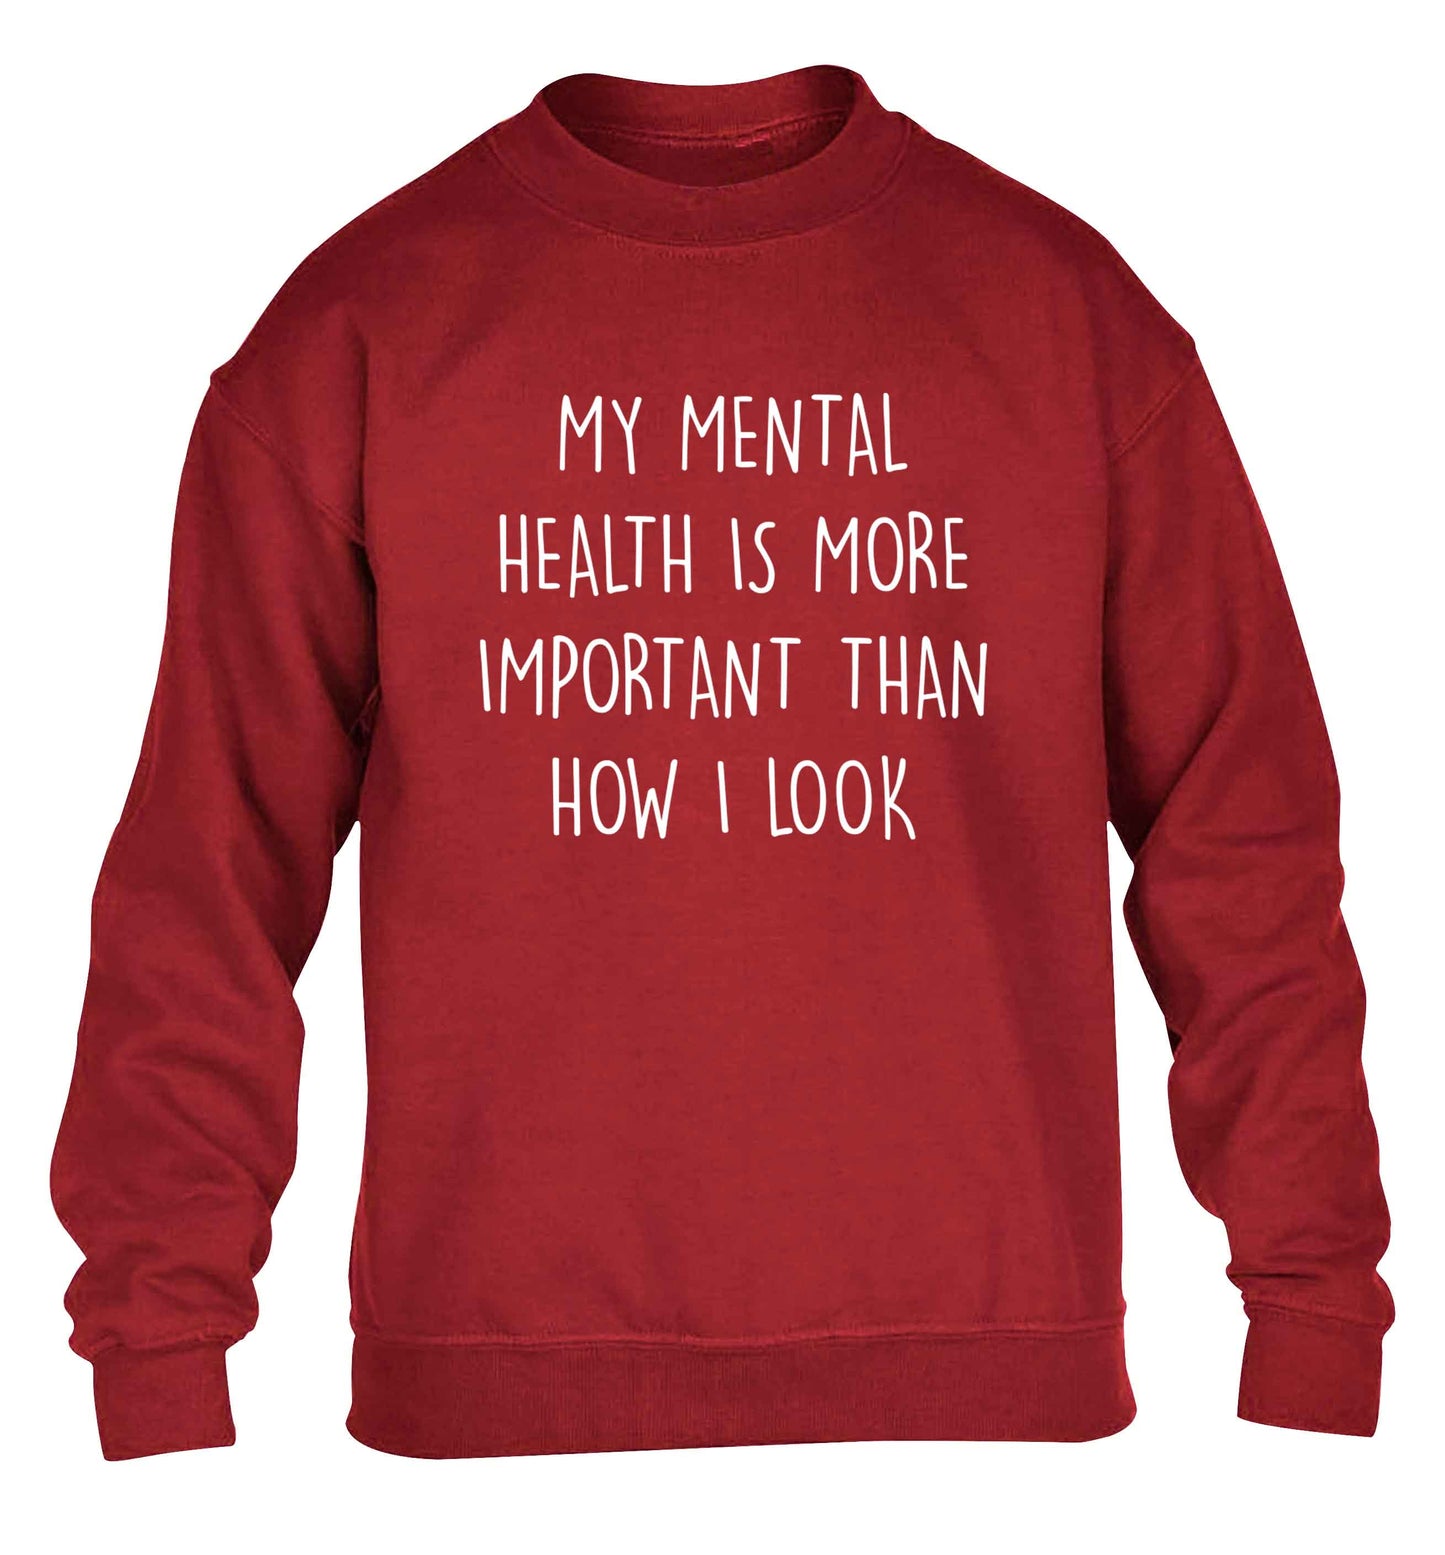 My mental health is more importnat than how I look children's grey sweater 12-13 Years